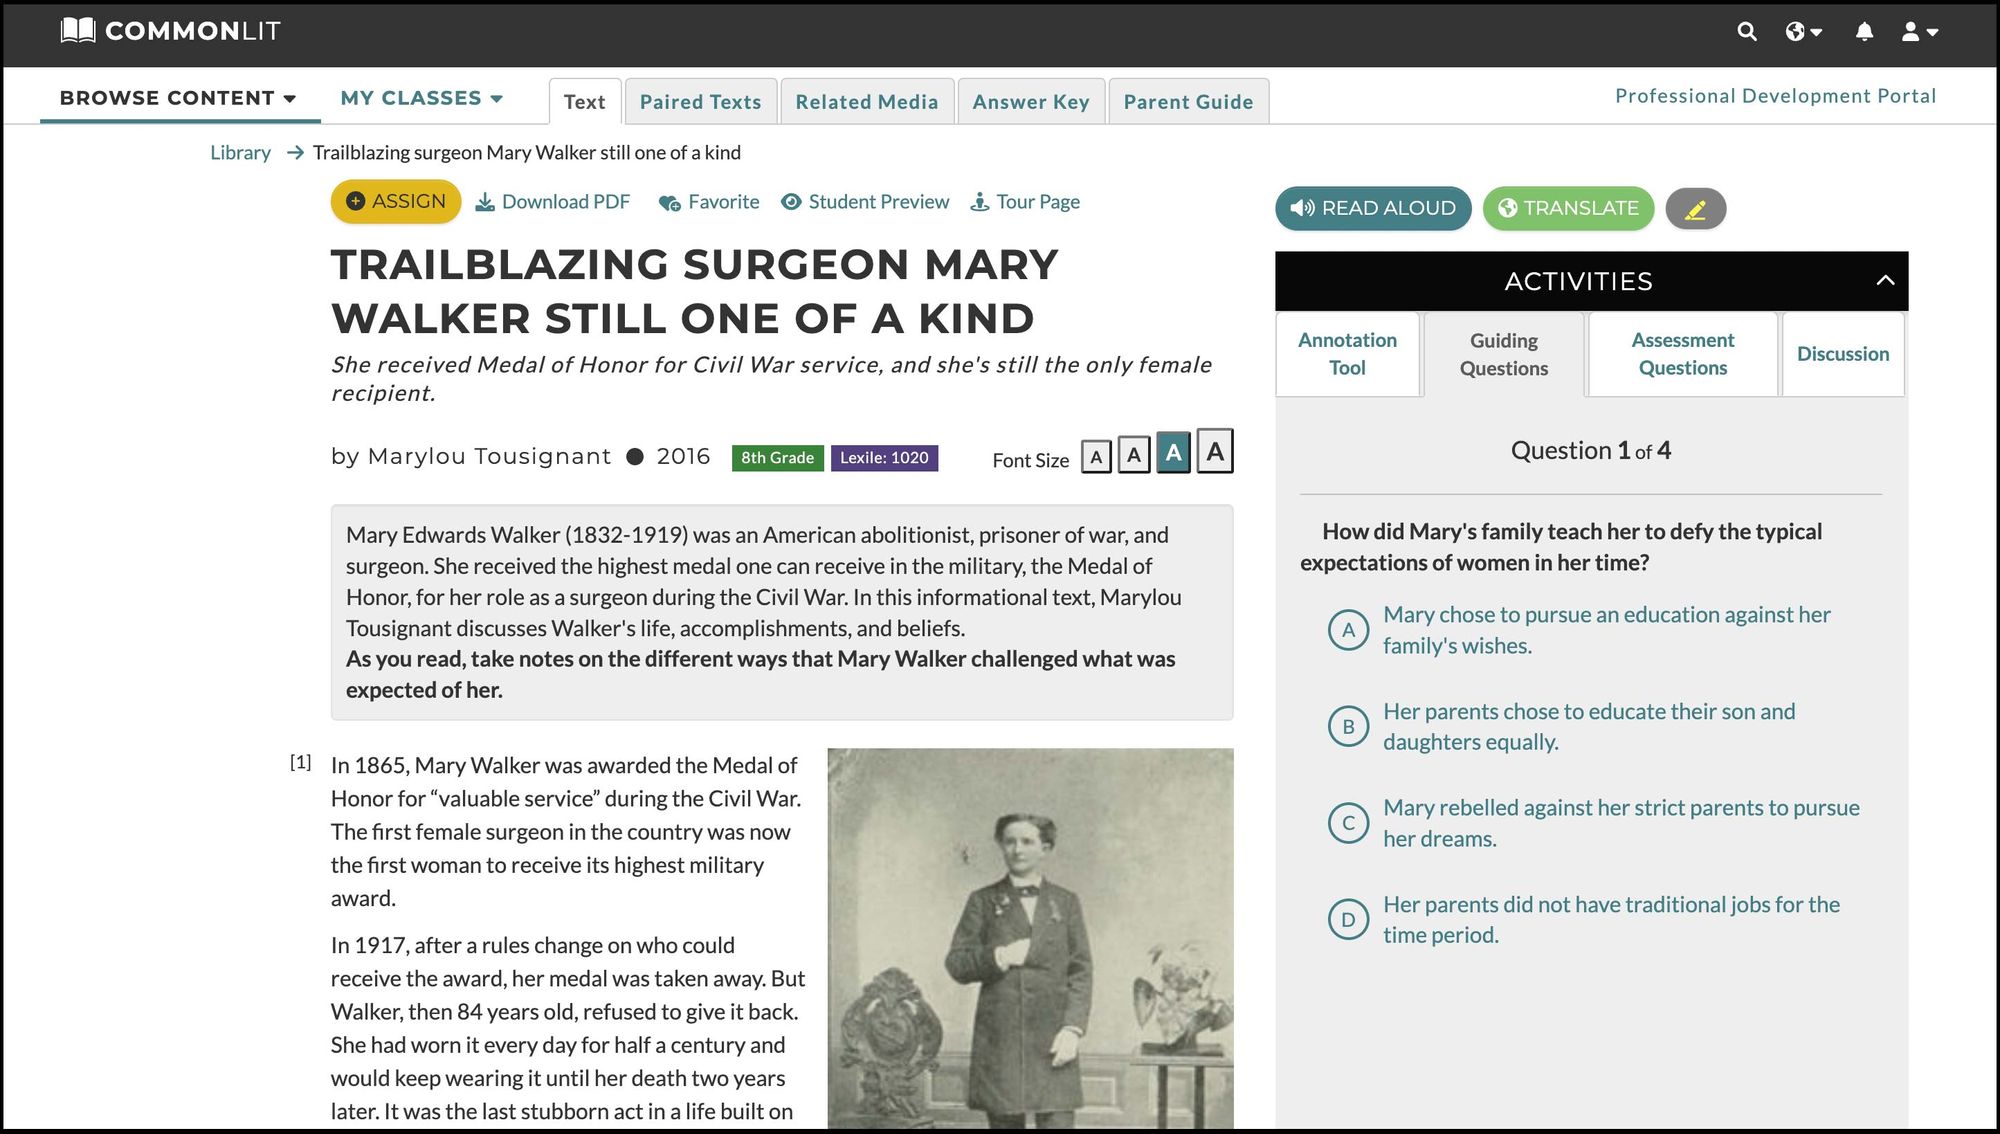 The CommonLit lesson "Trailblazing Surgeon Mary Walker Still One of a Kind."